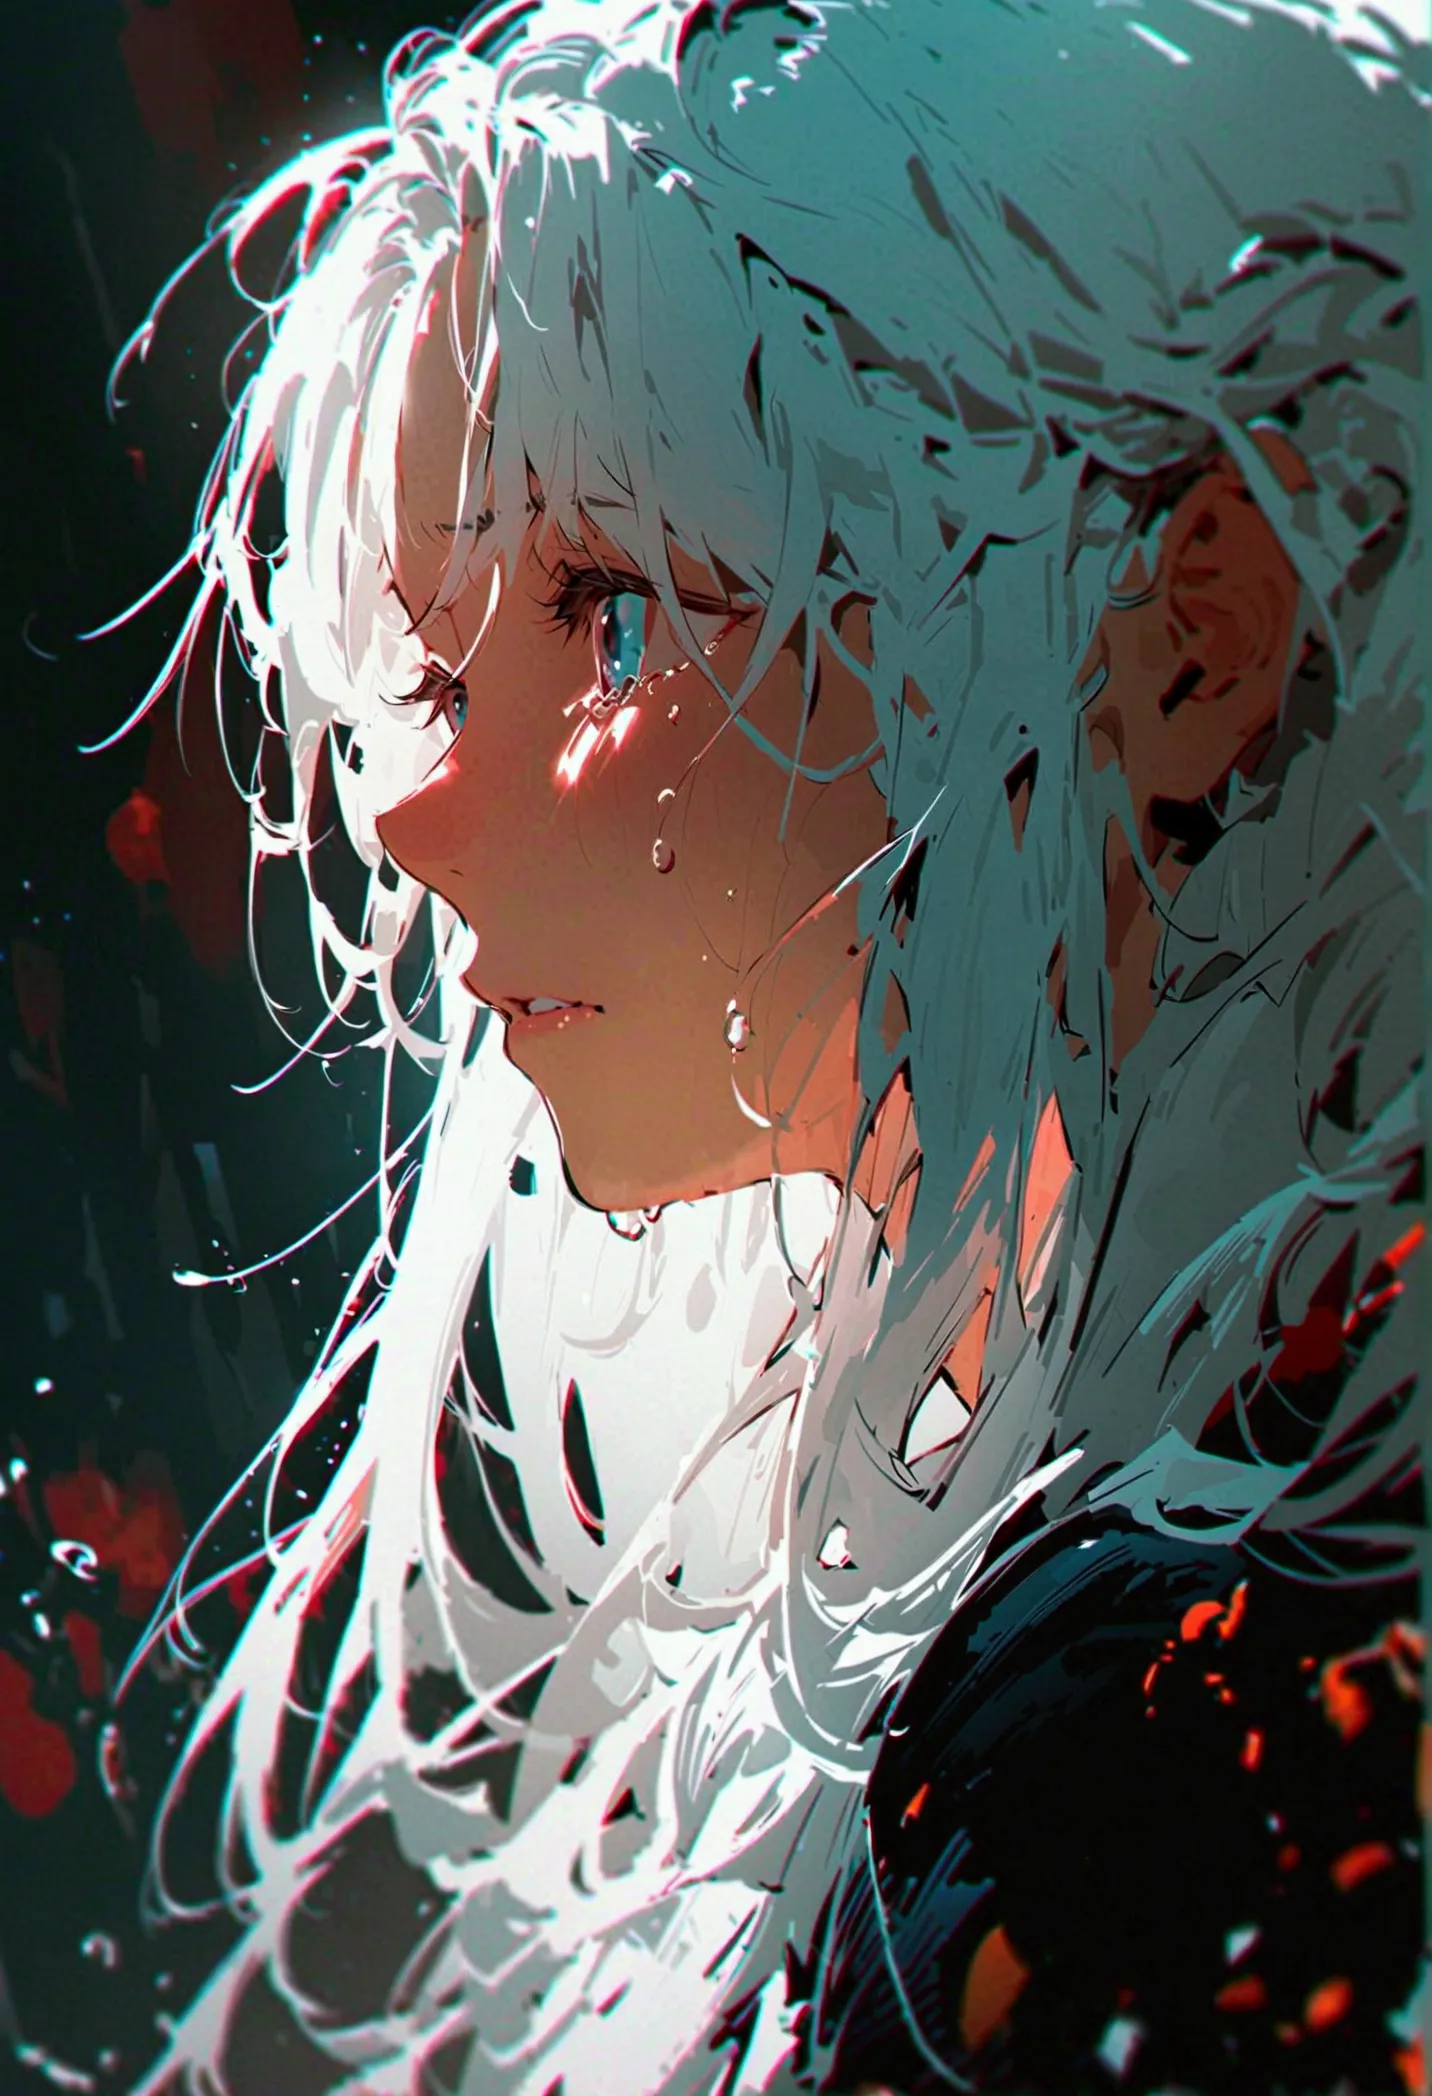 digital drawing,a woman crying, long white hair,just the face,UHD, high resolution, Blurred Background,Dark theme, solitary, dar...